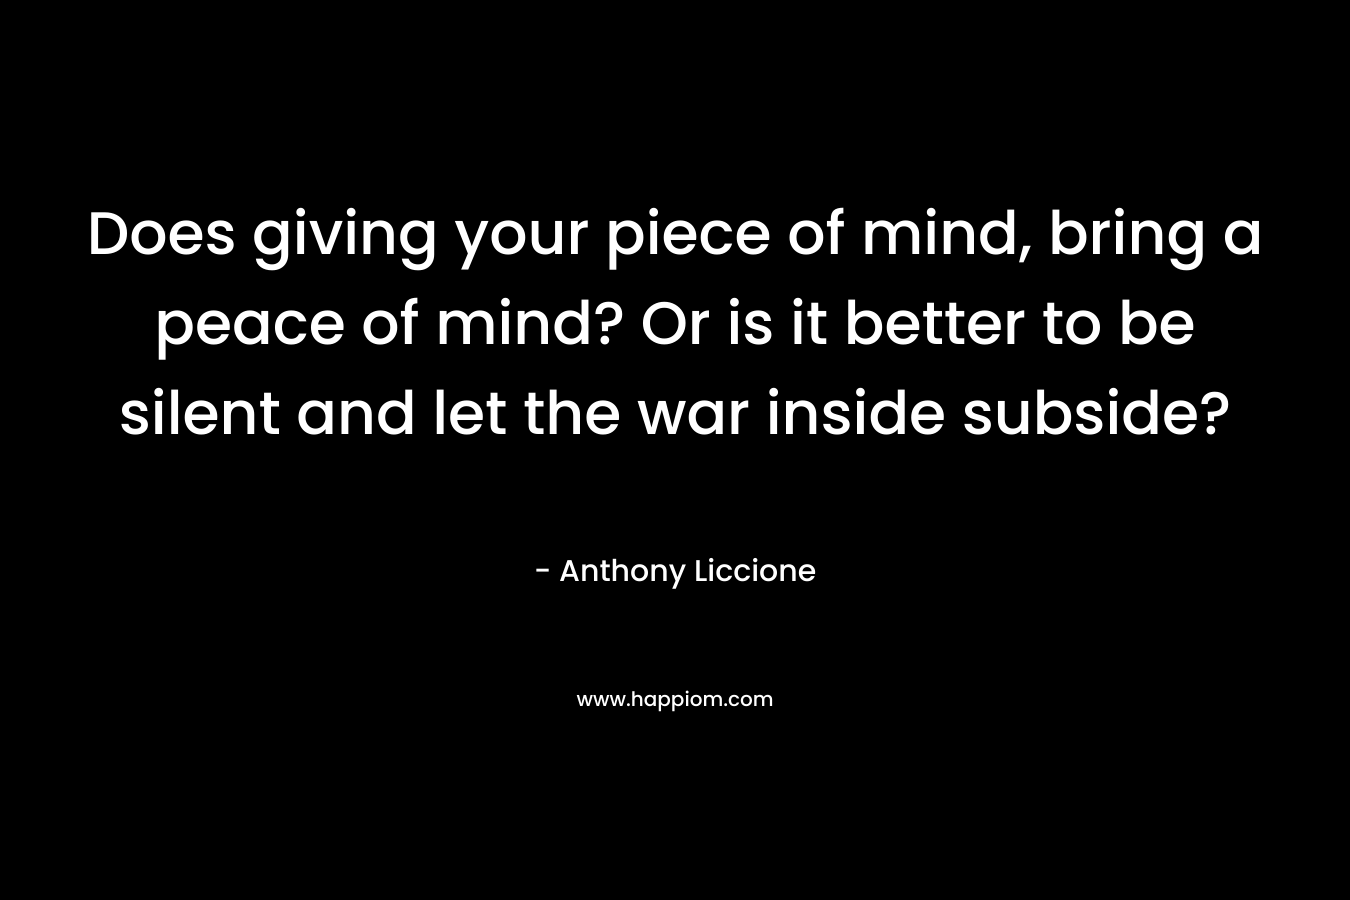 Does giving your piece of mind, bring a peace of mind? Or is it better to be silent and let the war inside subside?